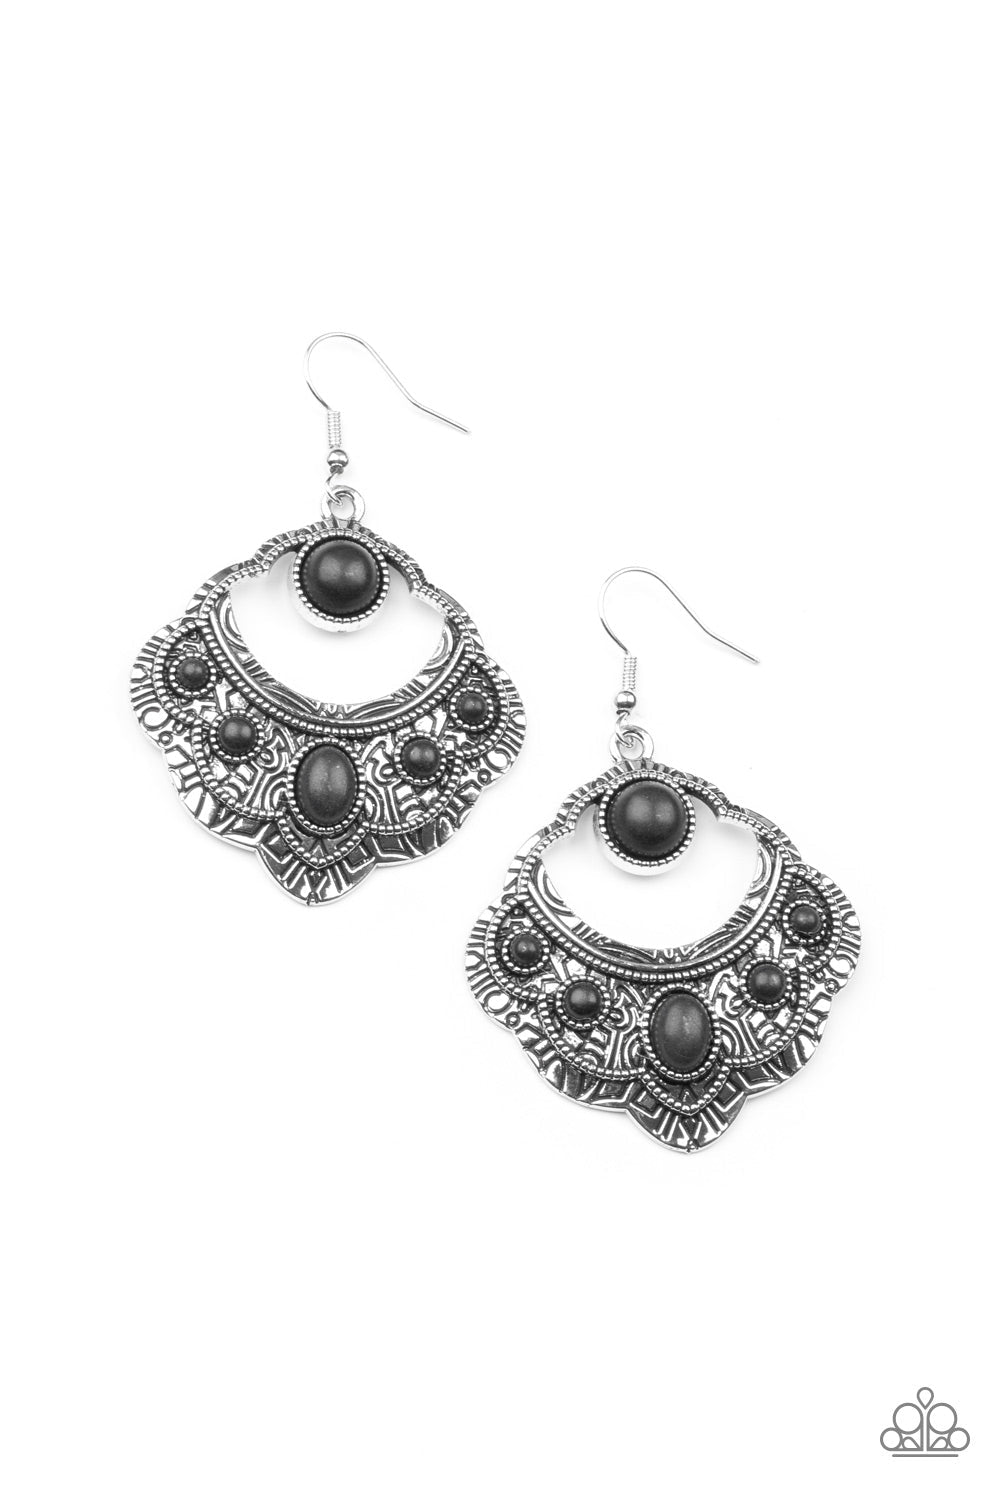 Saguaro Sunset - Black and Silver Earrings - Paparazzi Accessories - An earthy assortment of oval and round black stones adorn the front of a scalloped silver frame that is studded and engraved in tribal inspired details. Earring attaches to a standard fishhook fitting.